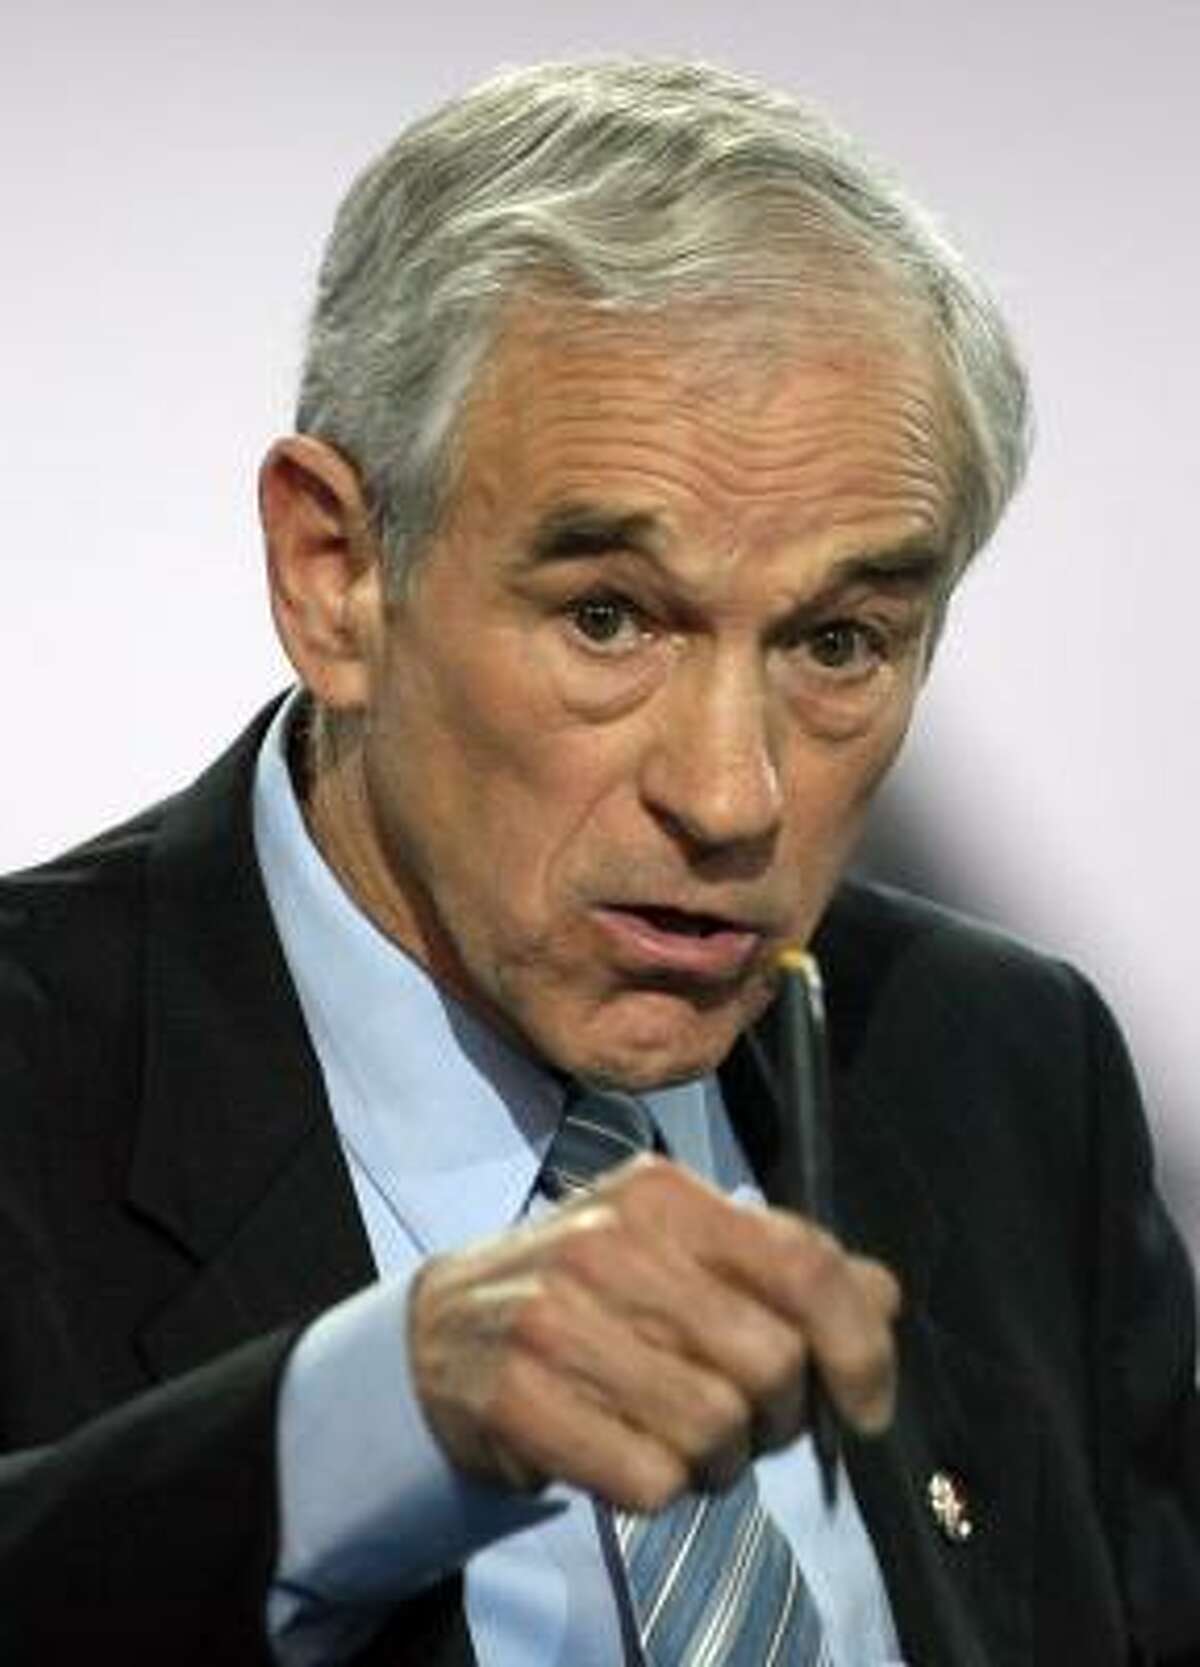 Ron Paul has $4 million in political cash leftover from his presidential bid.